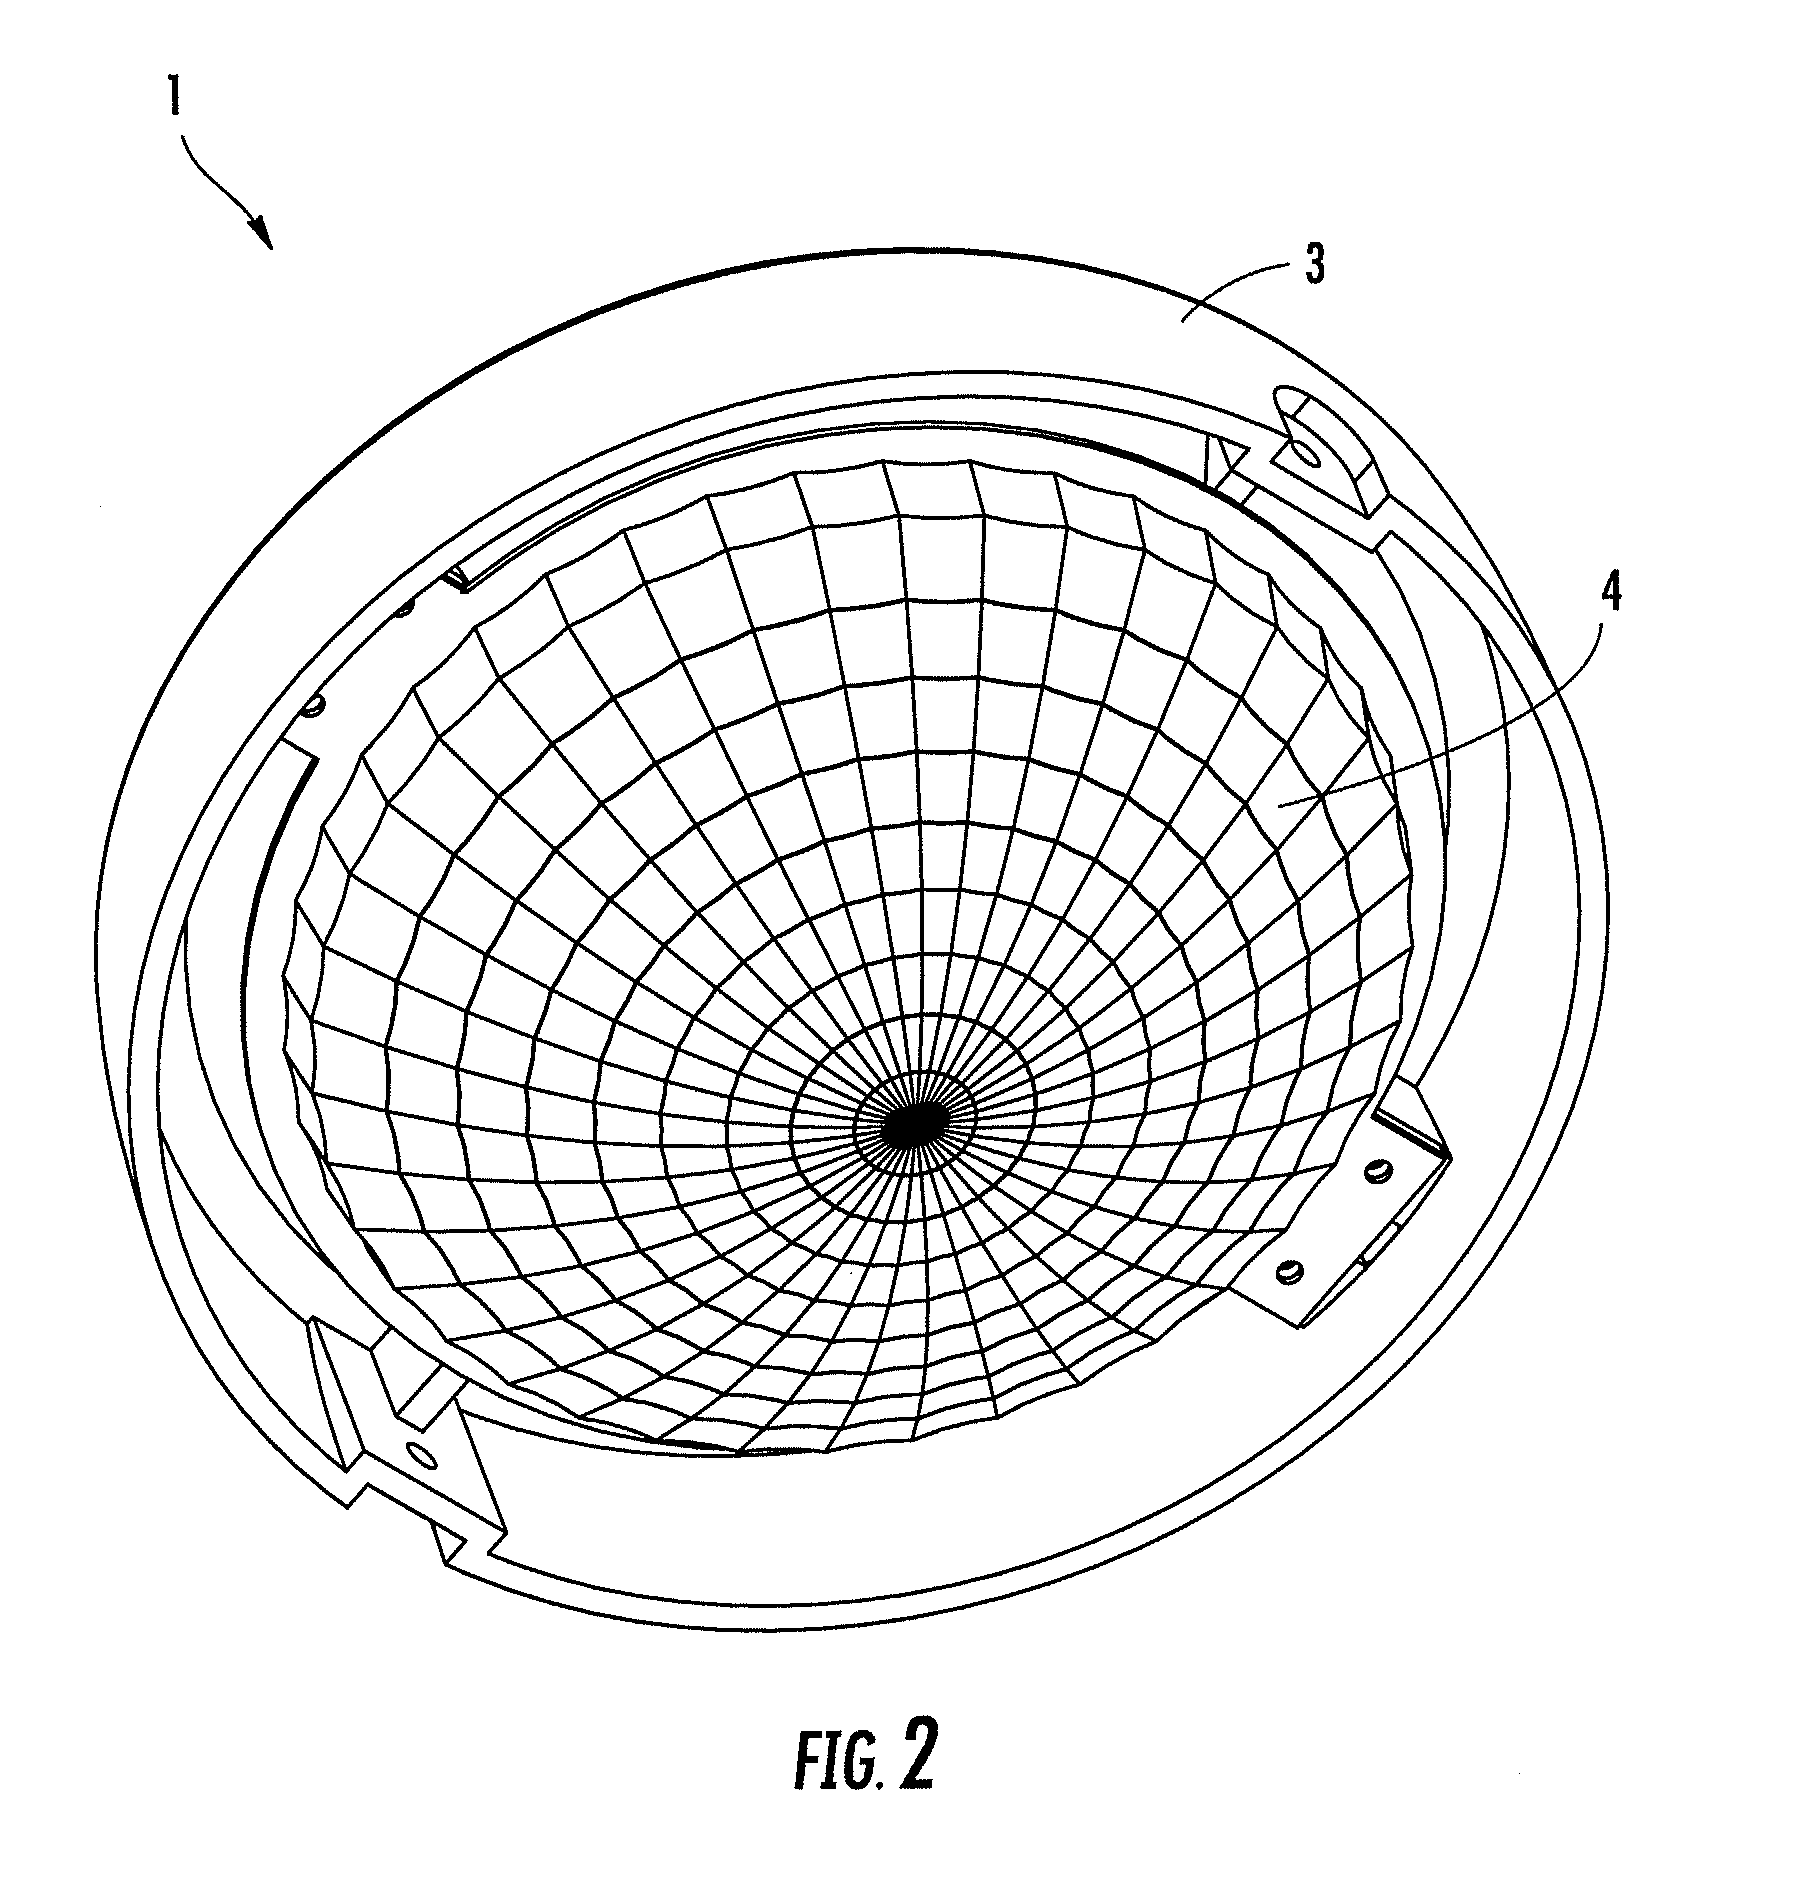 Non-glare reflective LED lighting apparatus with heat sink mounting